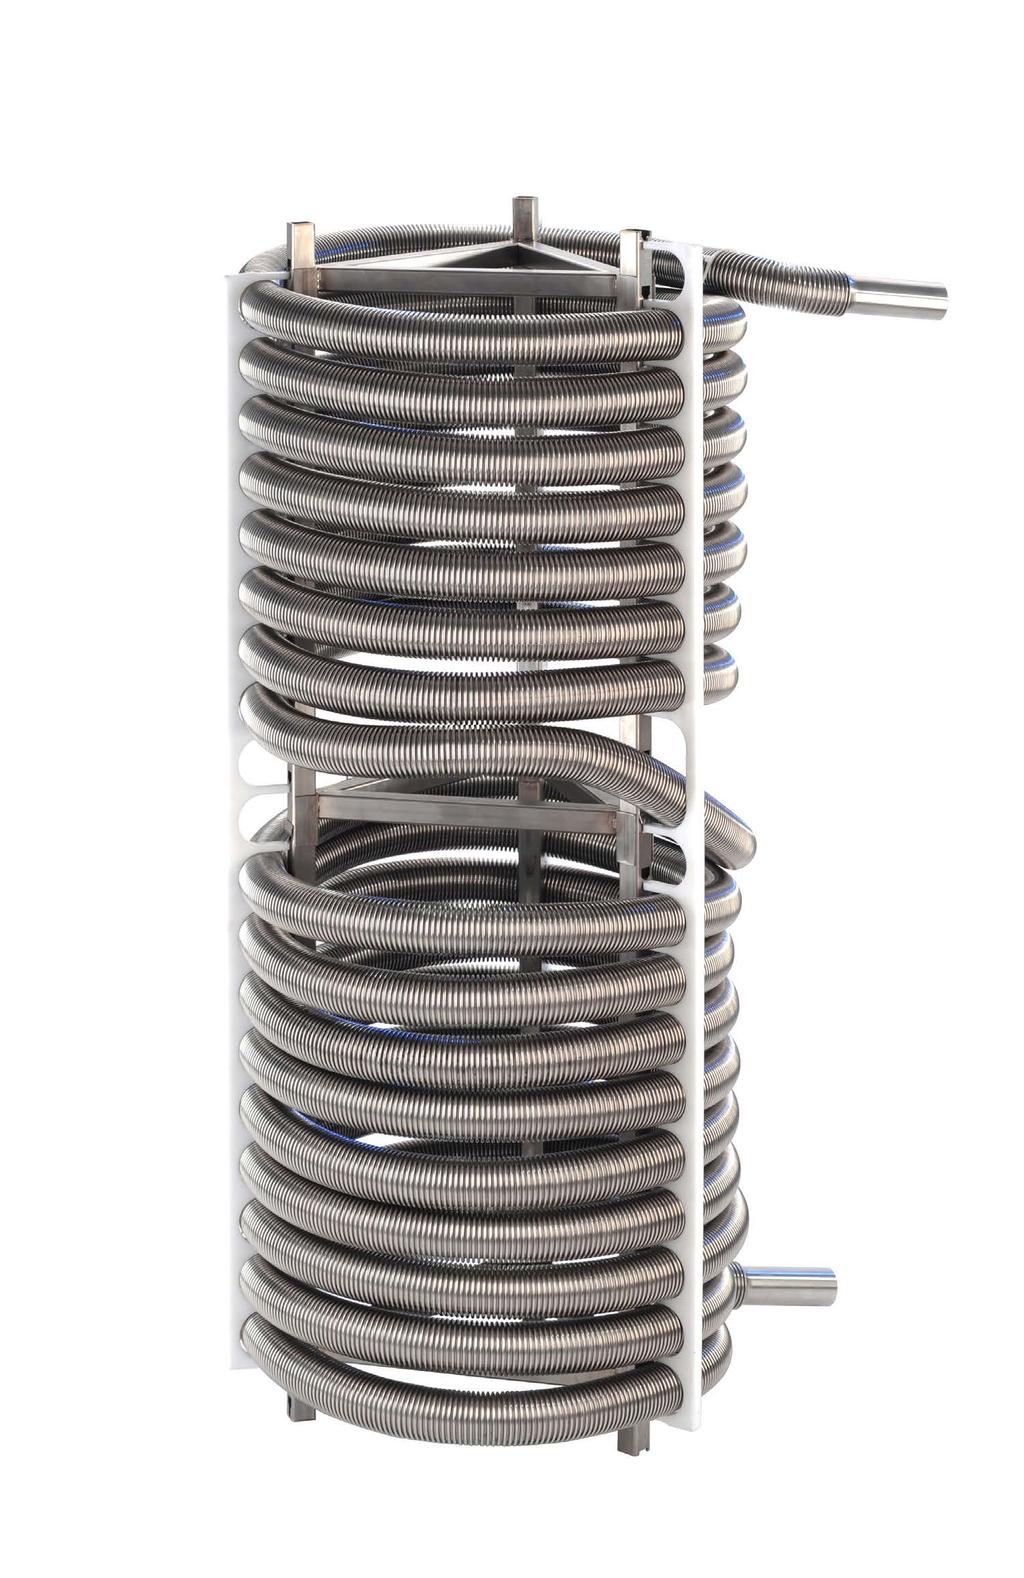 Products Heat exchanger AZ INTEC corrugated pipe and corrugated tube products as a basis From pipe-in-pipe heat exchangers to use in storage systems Development of heat exchangers for specific